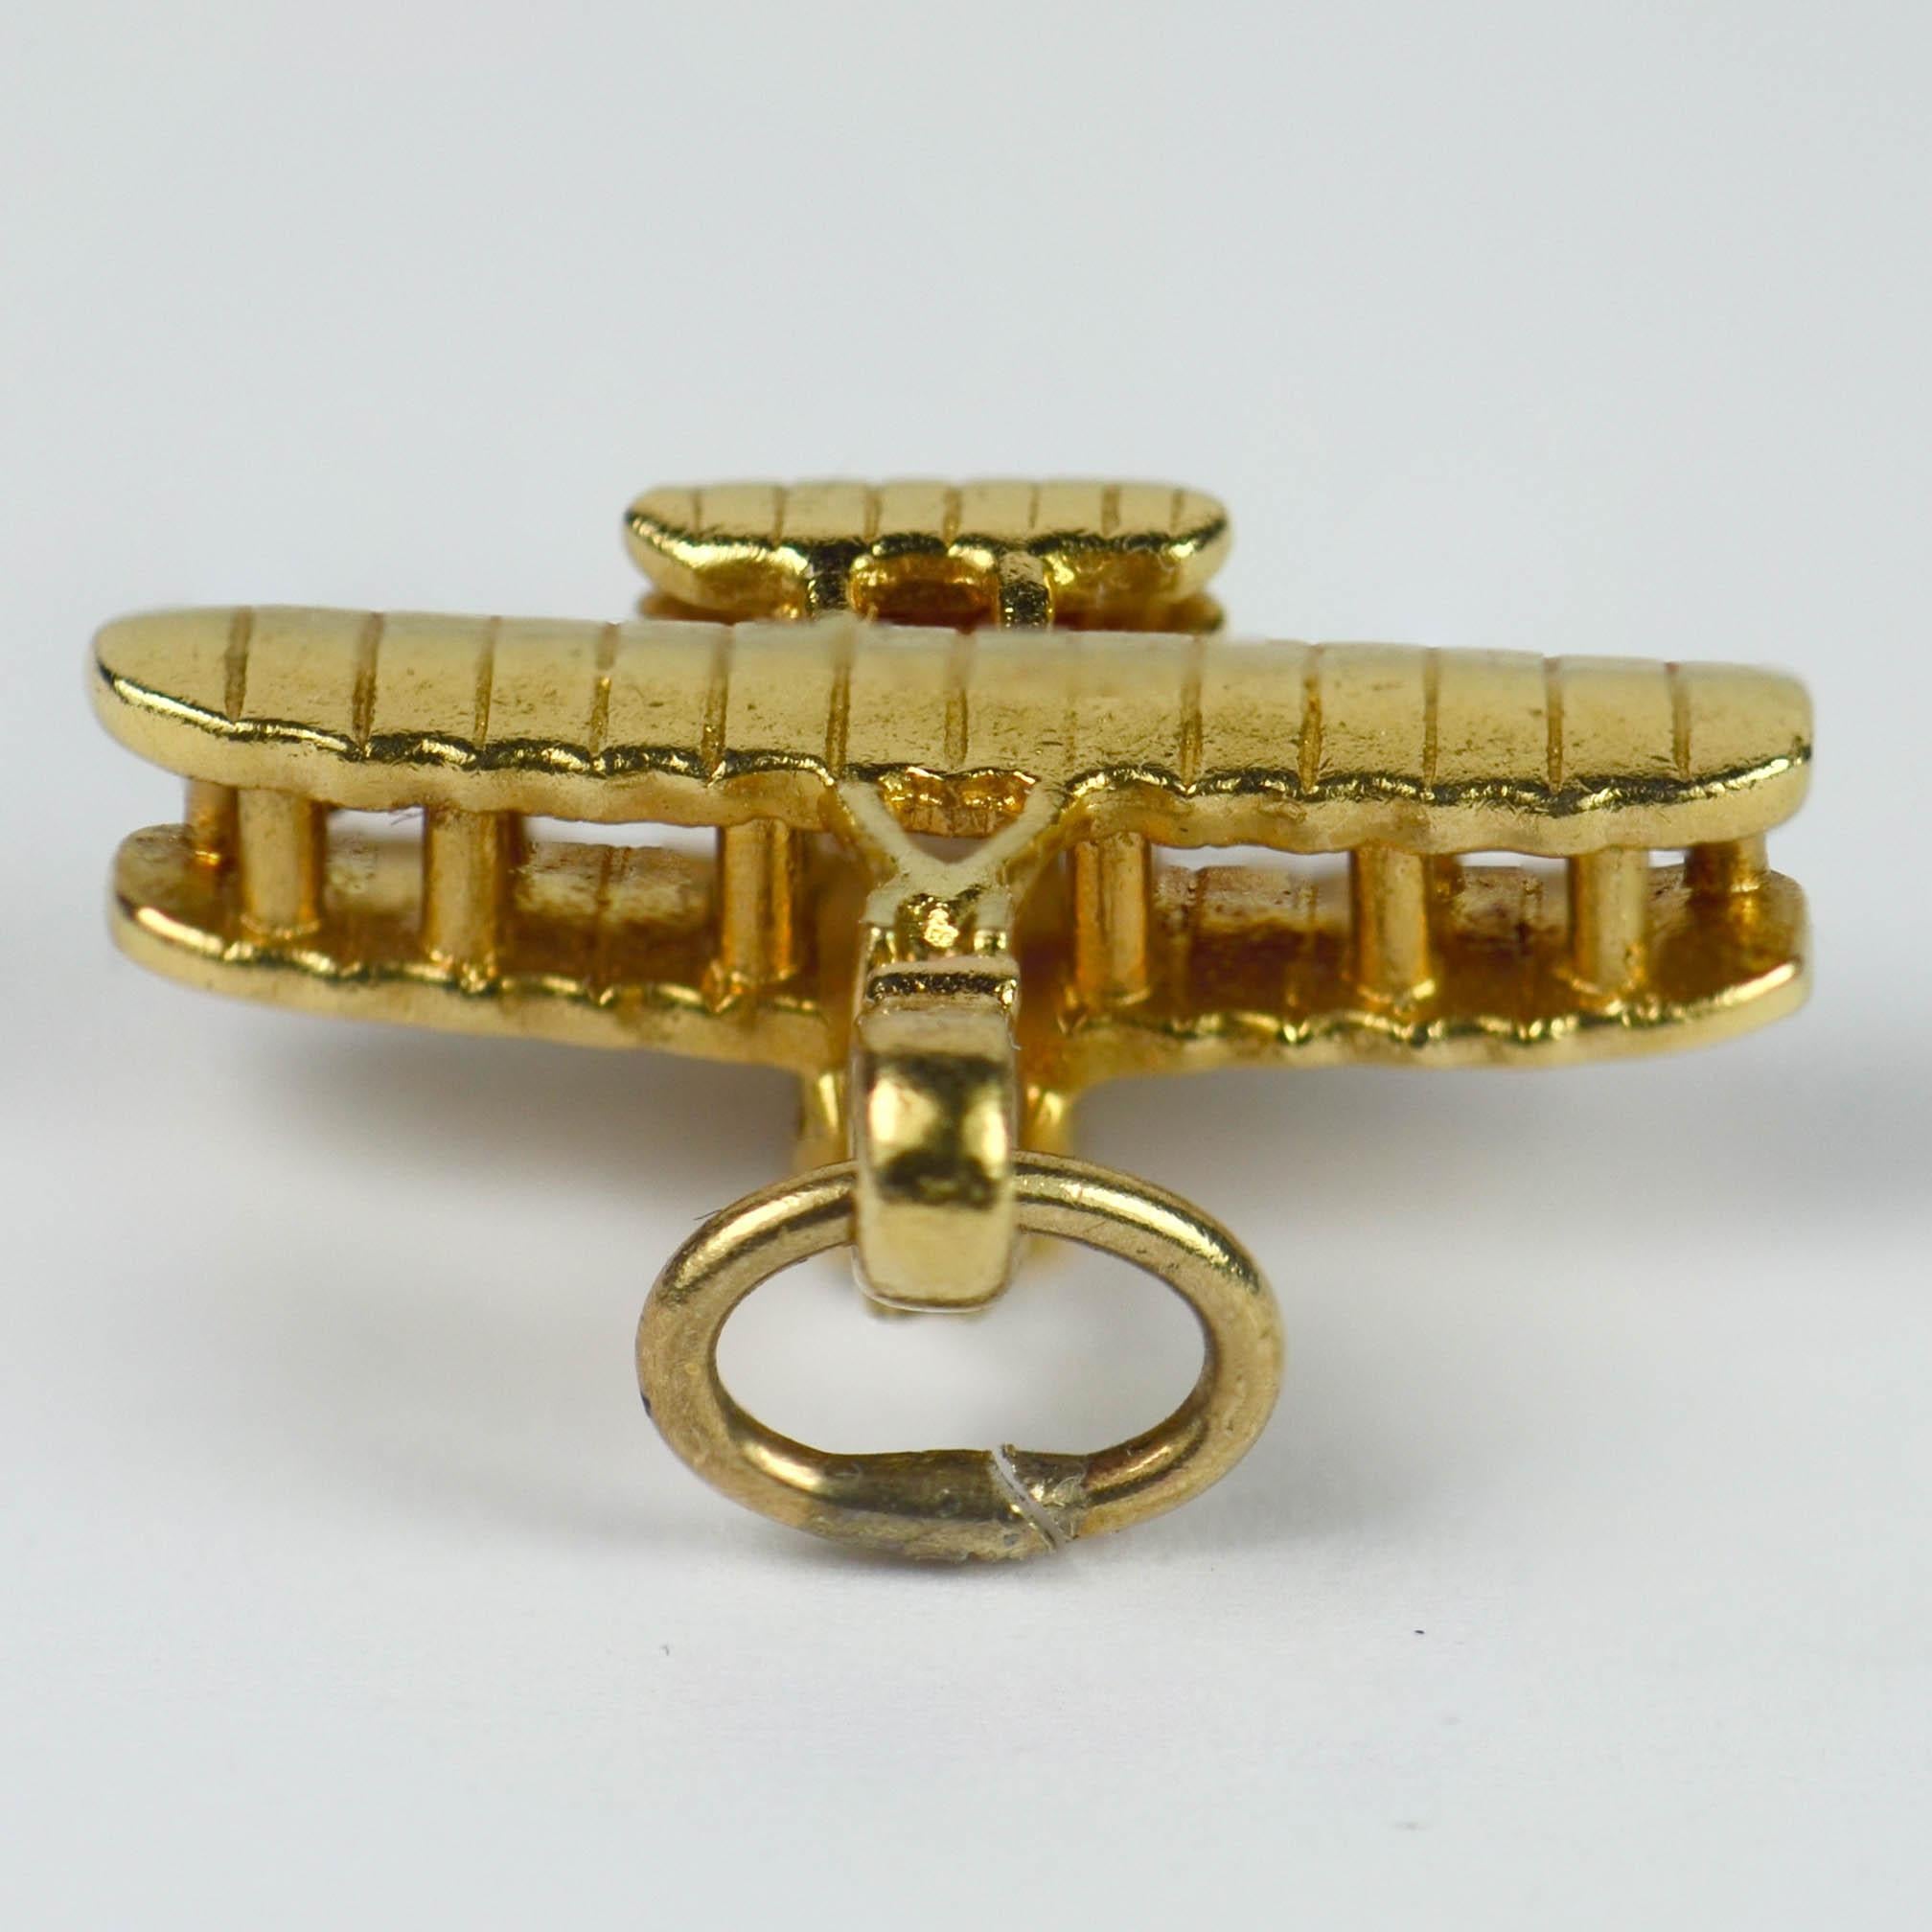 A 14 karat yellow gold charm pendant designed as the 1909 'Model A' Flyer - a biplane designed by the Wright Brothers which was sold to the US Army Signal Corps in July 1909 as the first American military airplane.

Marked 'WRIGHT BROS FLYER' and